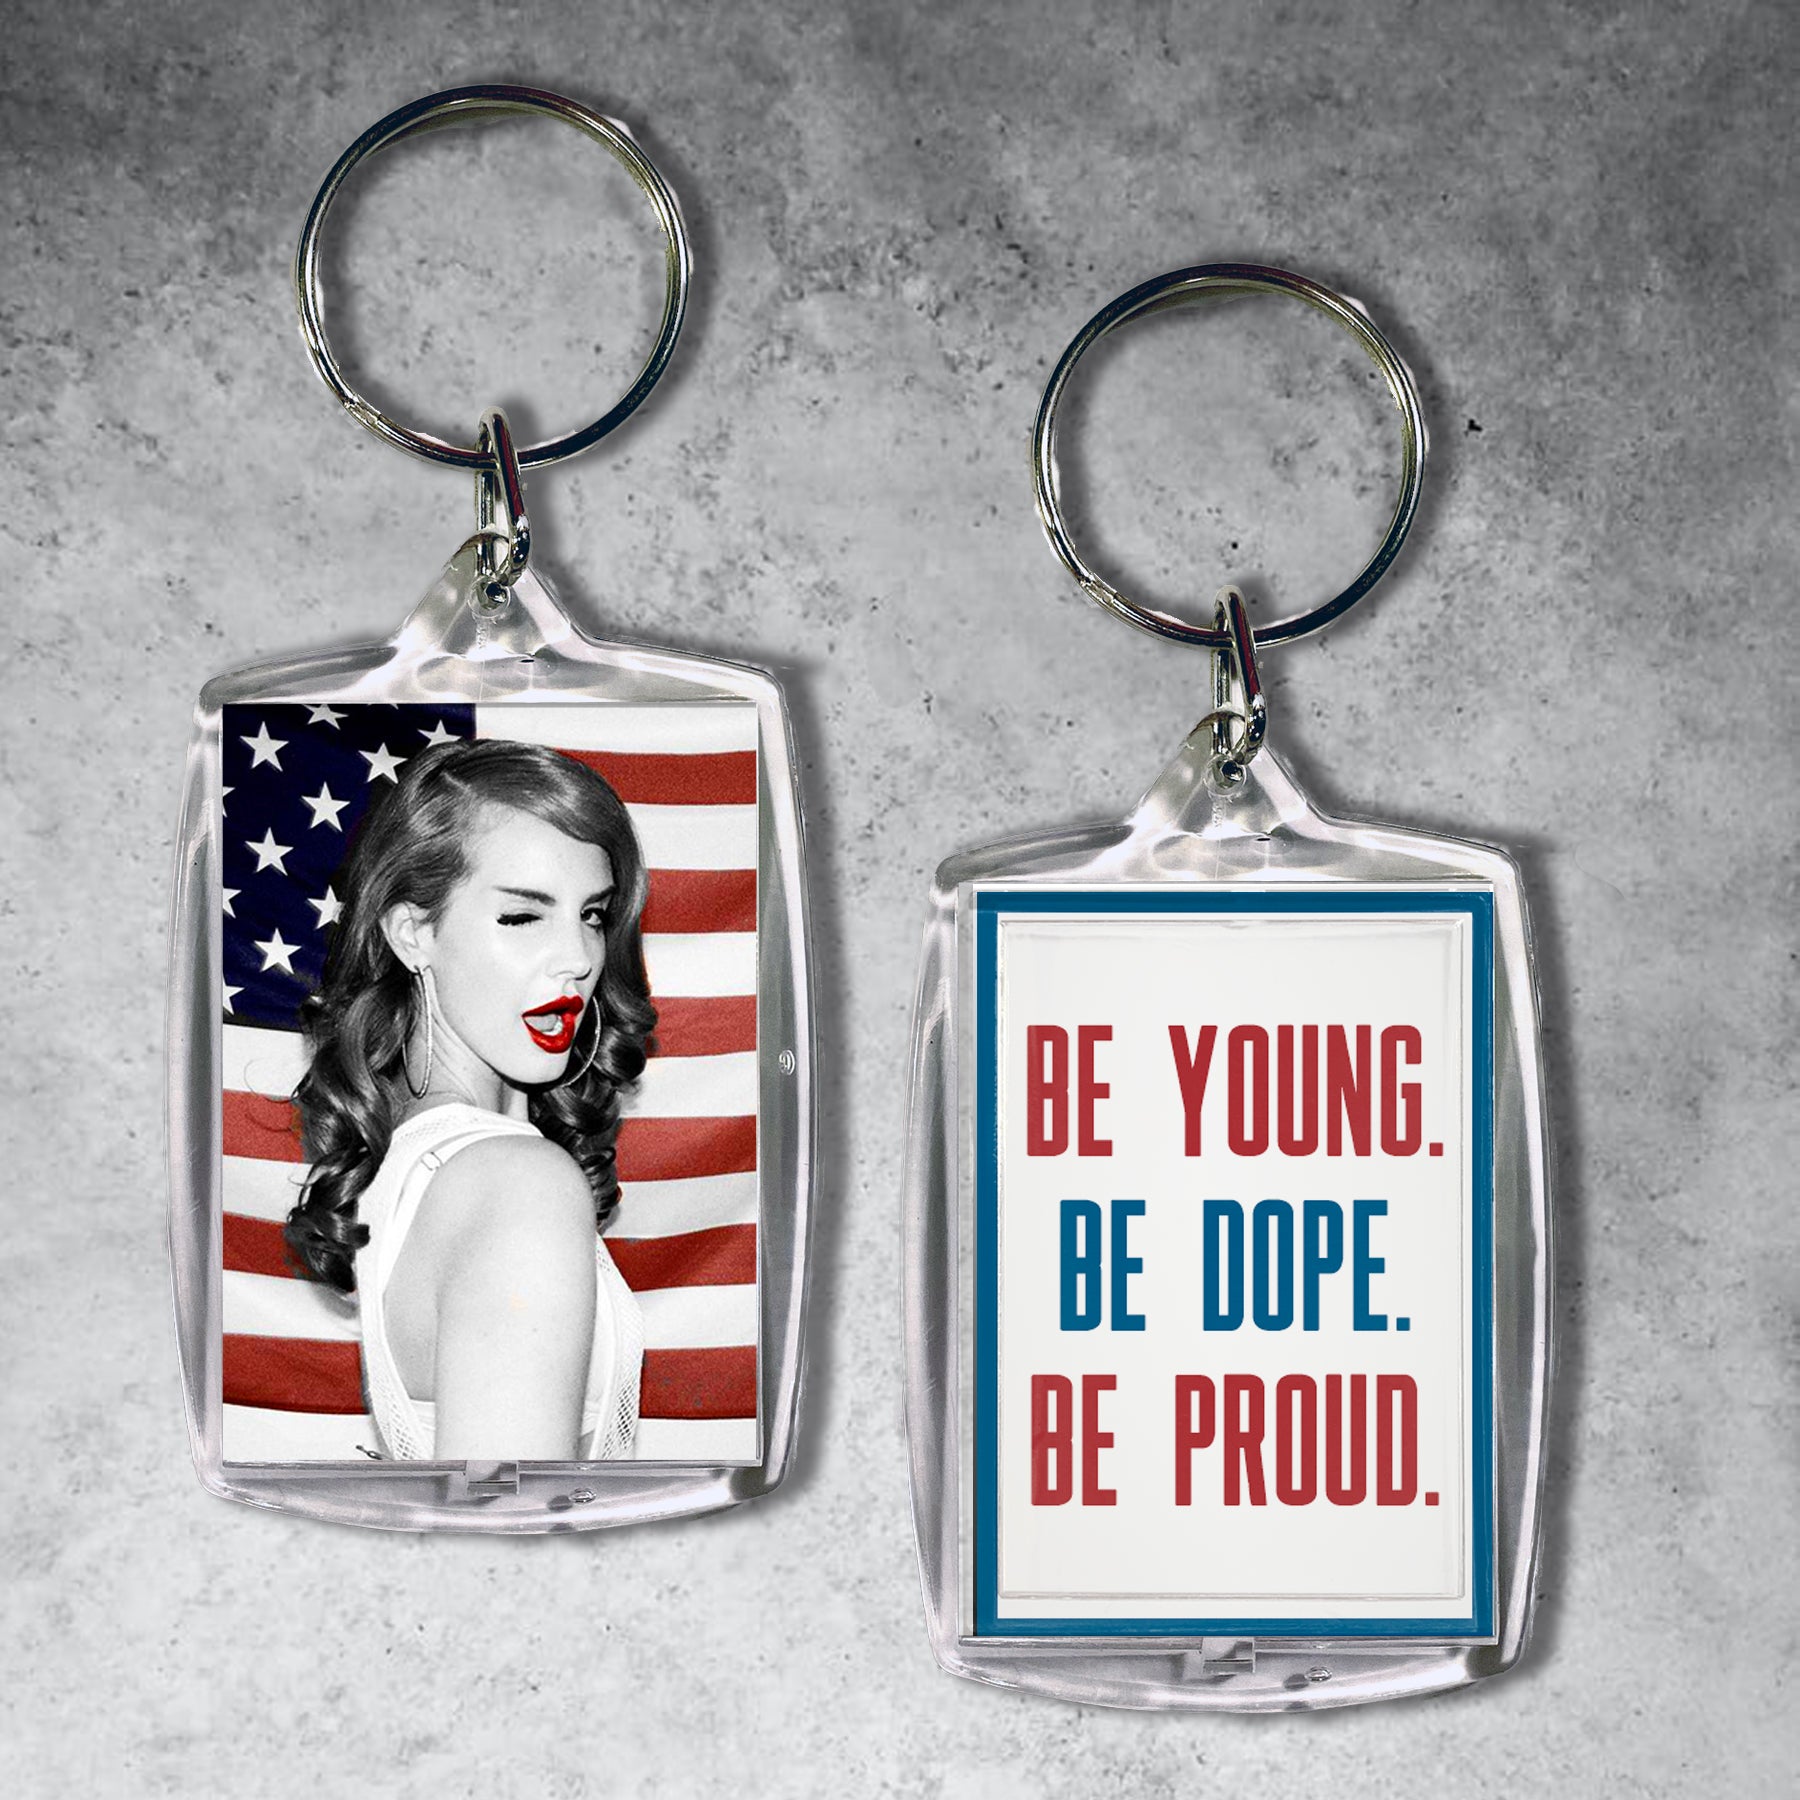 lana del rey young dope proud keychain